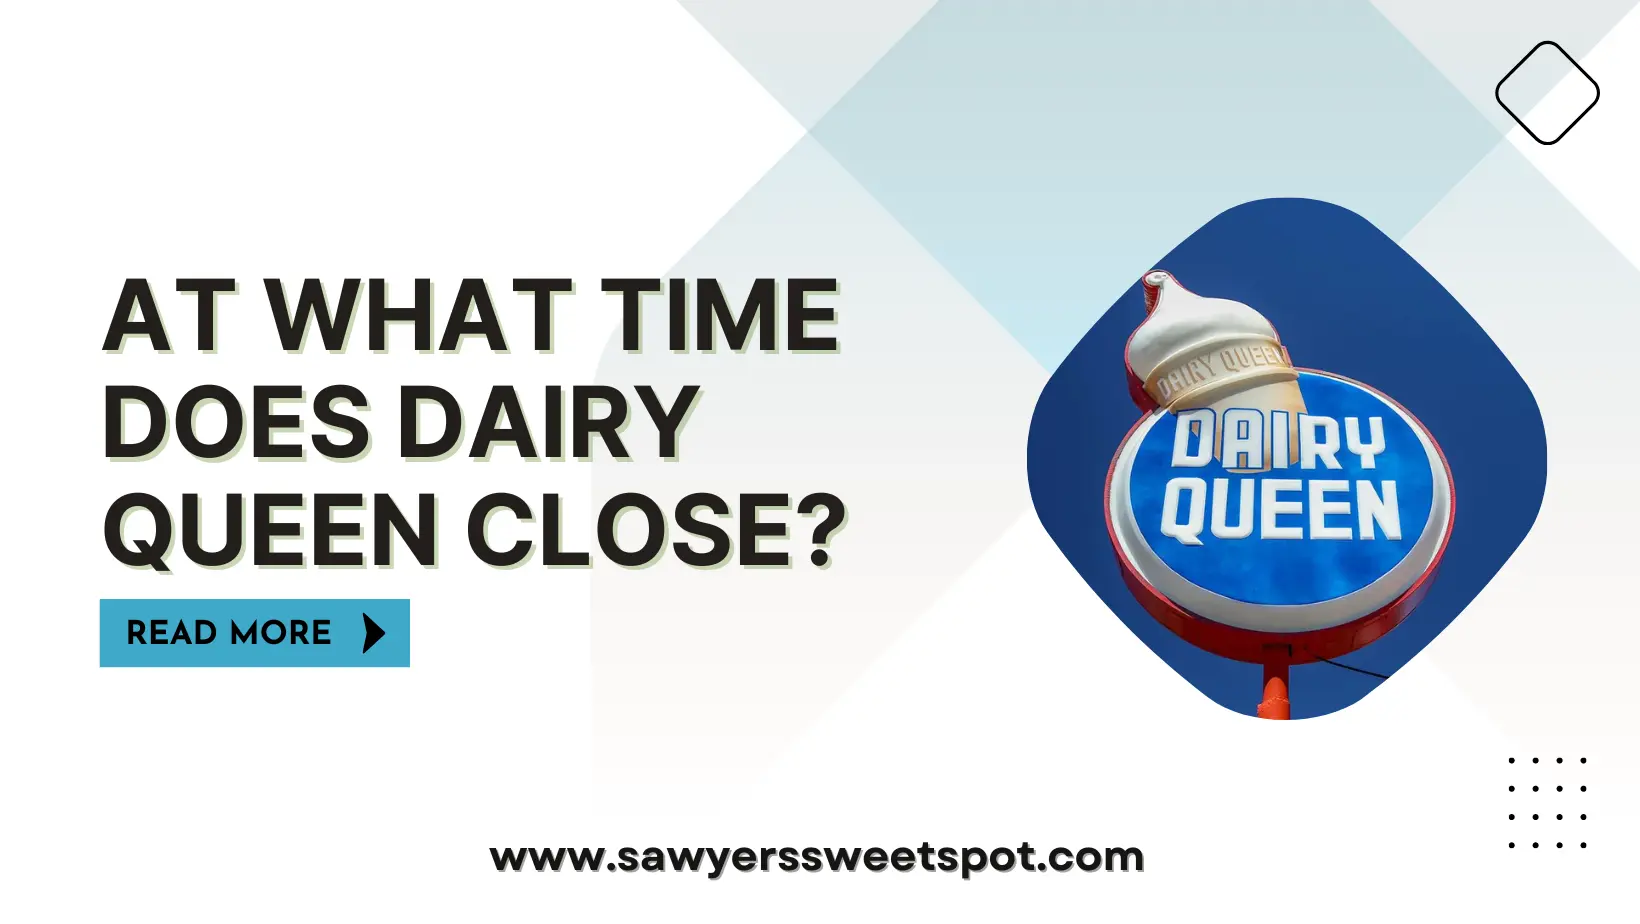 At What Time Does Dairy Queen Close?